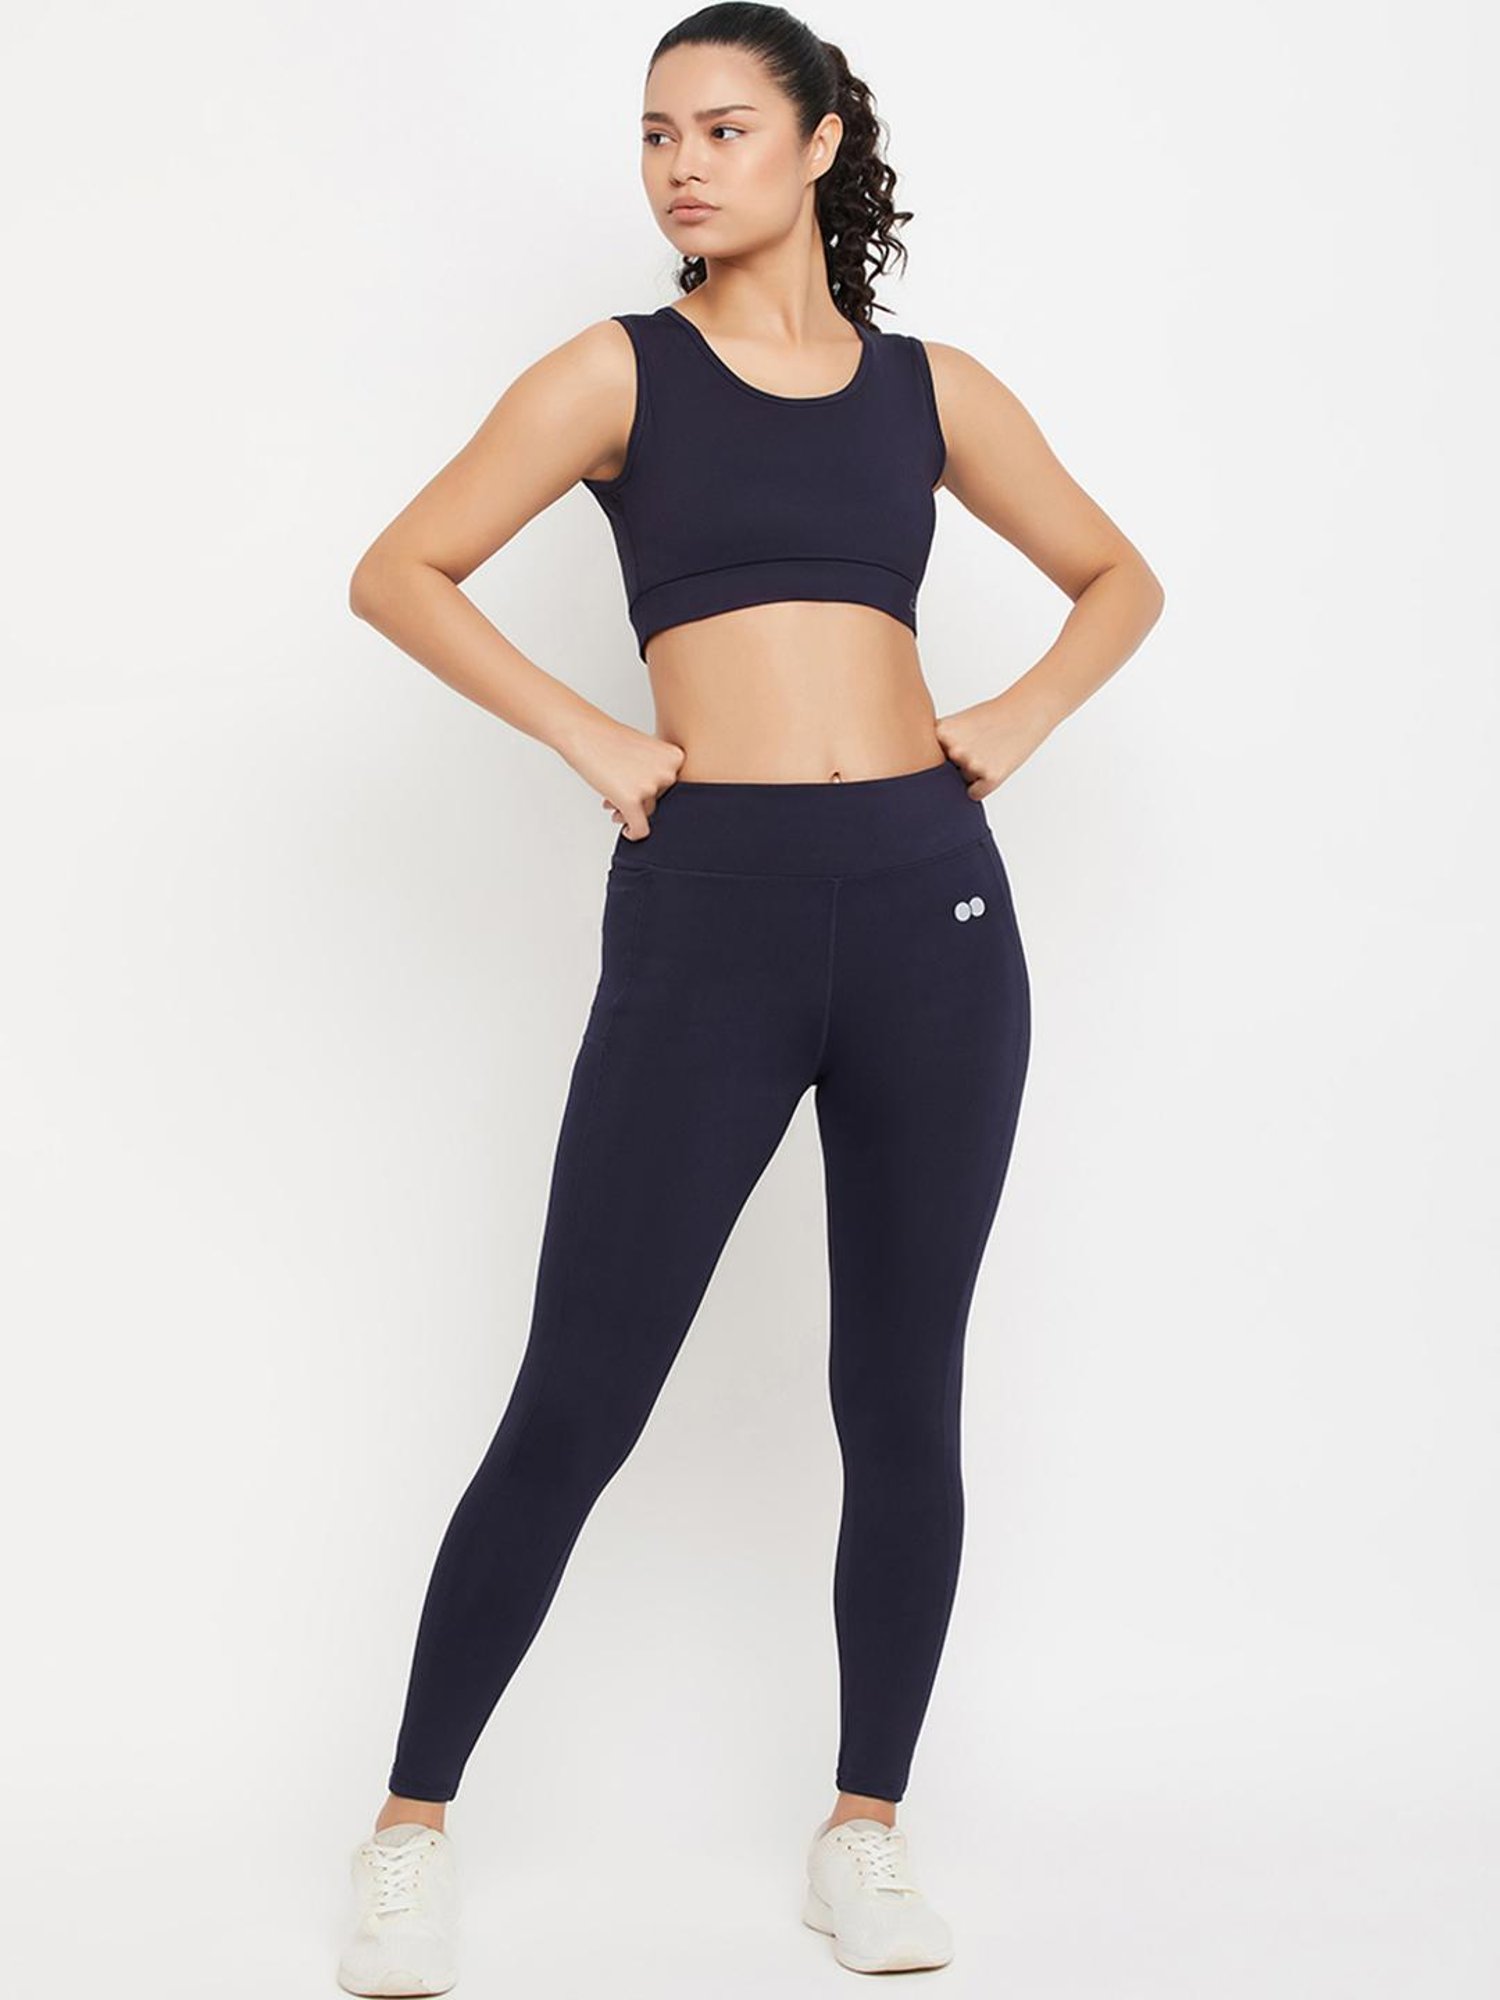 A model teams up black bra with black leggings during the photoshoot.